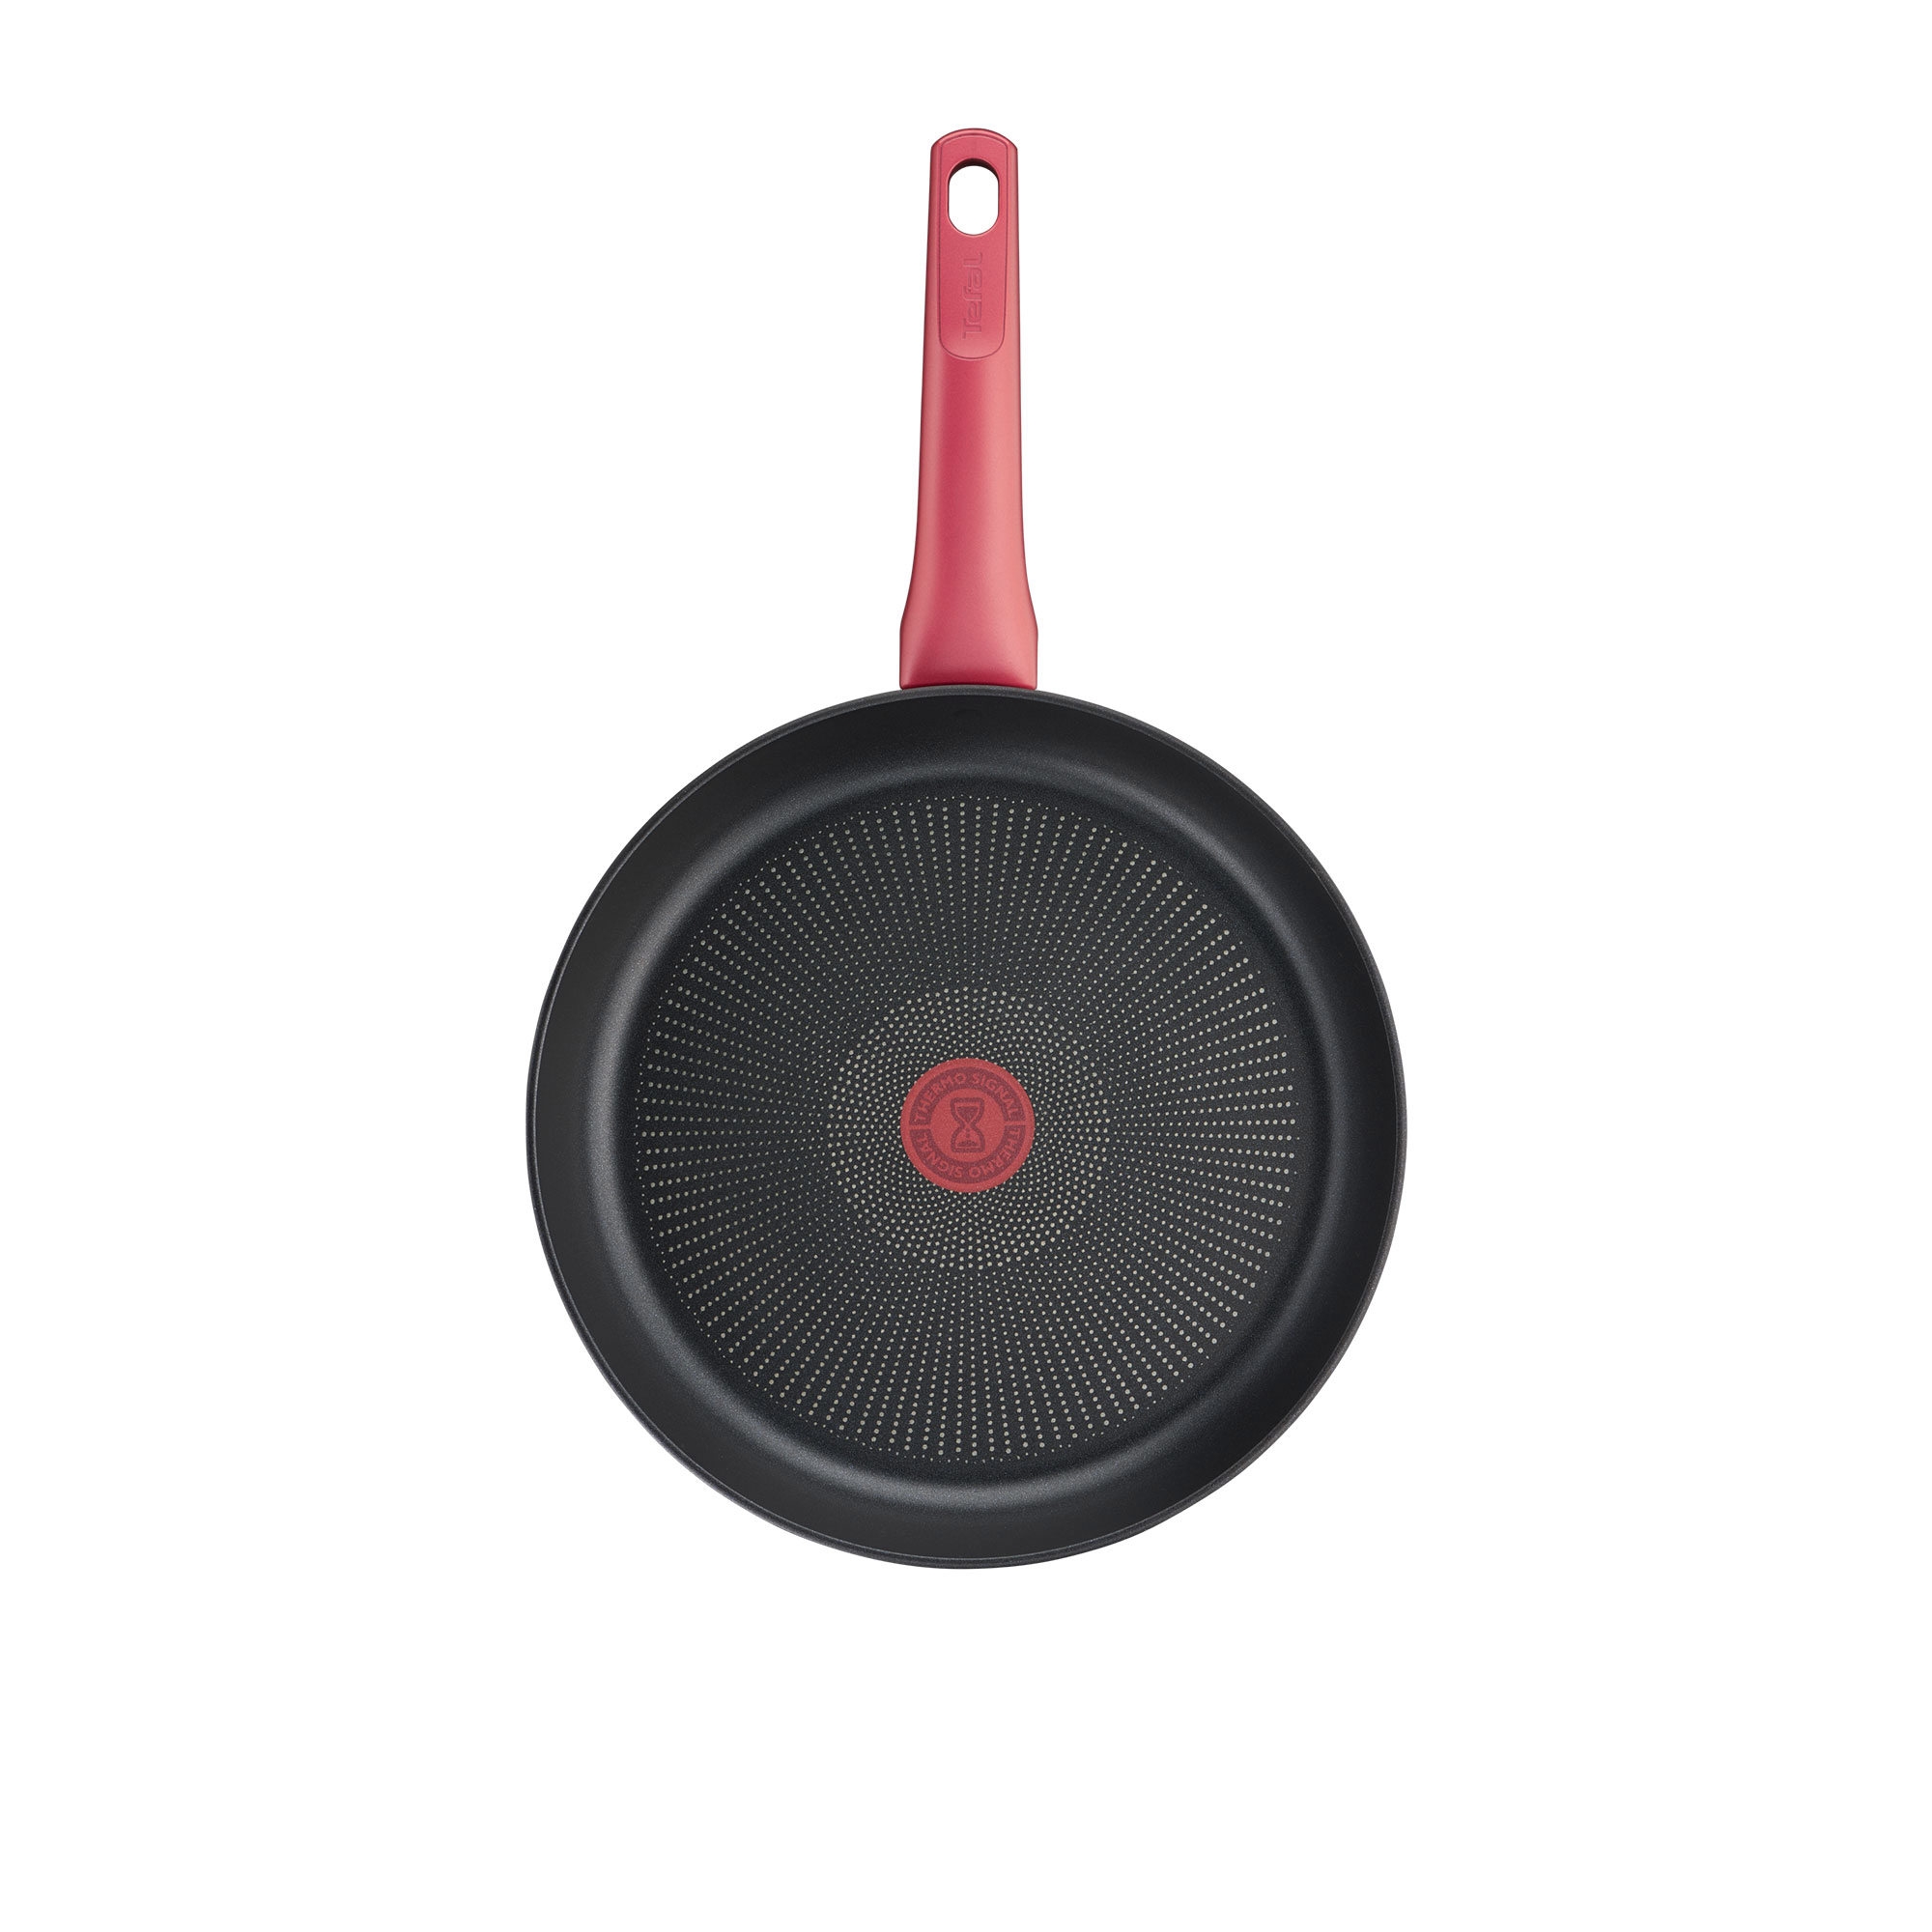 Tefal Perfect Cook Induction Non Stick Frypan 30cm Image 2